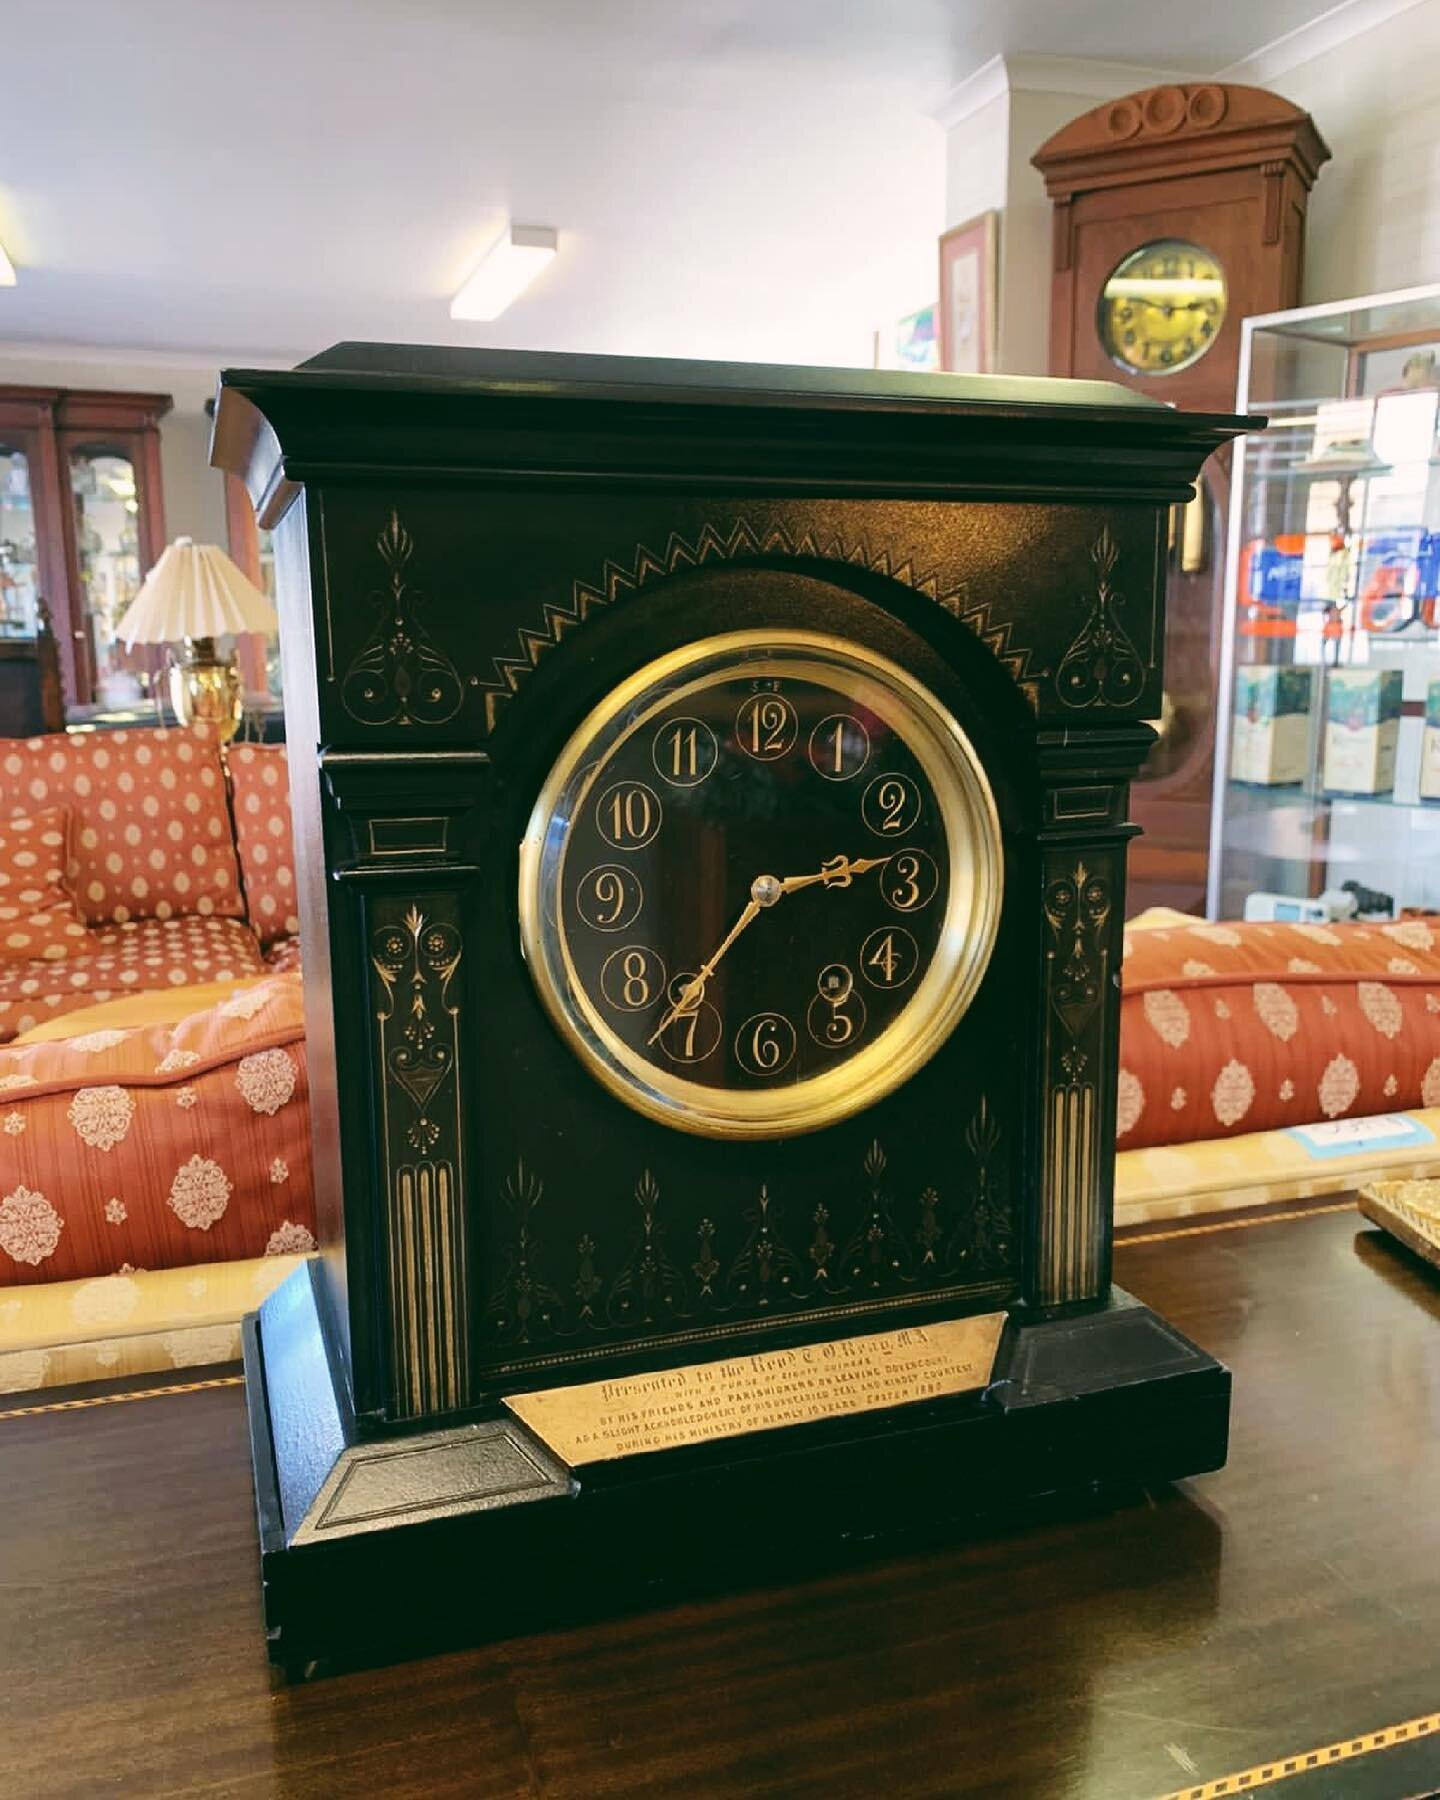 Beautifully crafted Mantle, Grandfather &amp; Grandmother Clocks. A stand-out showpiece for the lounge, dining room, hallway or bedroom. Giving a lovely homely feeling with their timely chimes.

Black Marble-cased Mantle Clock with Brass Finish. Made